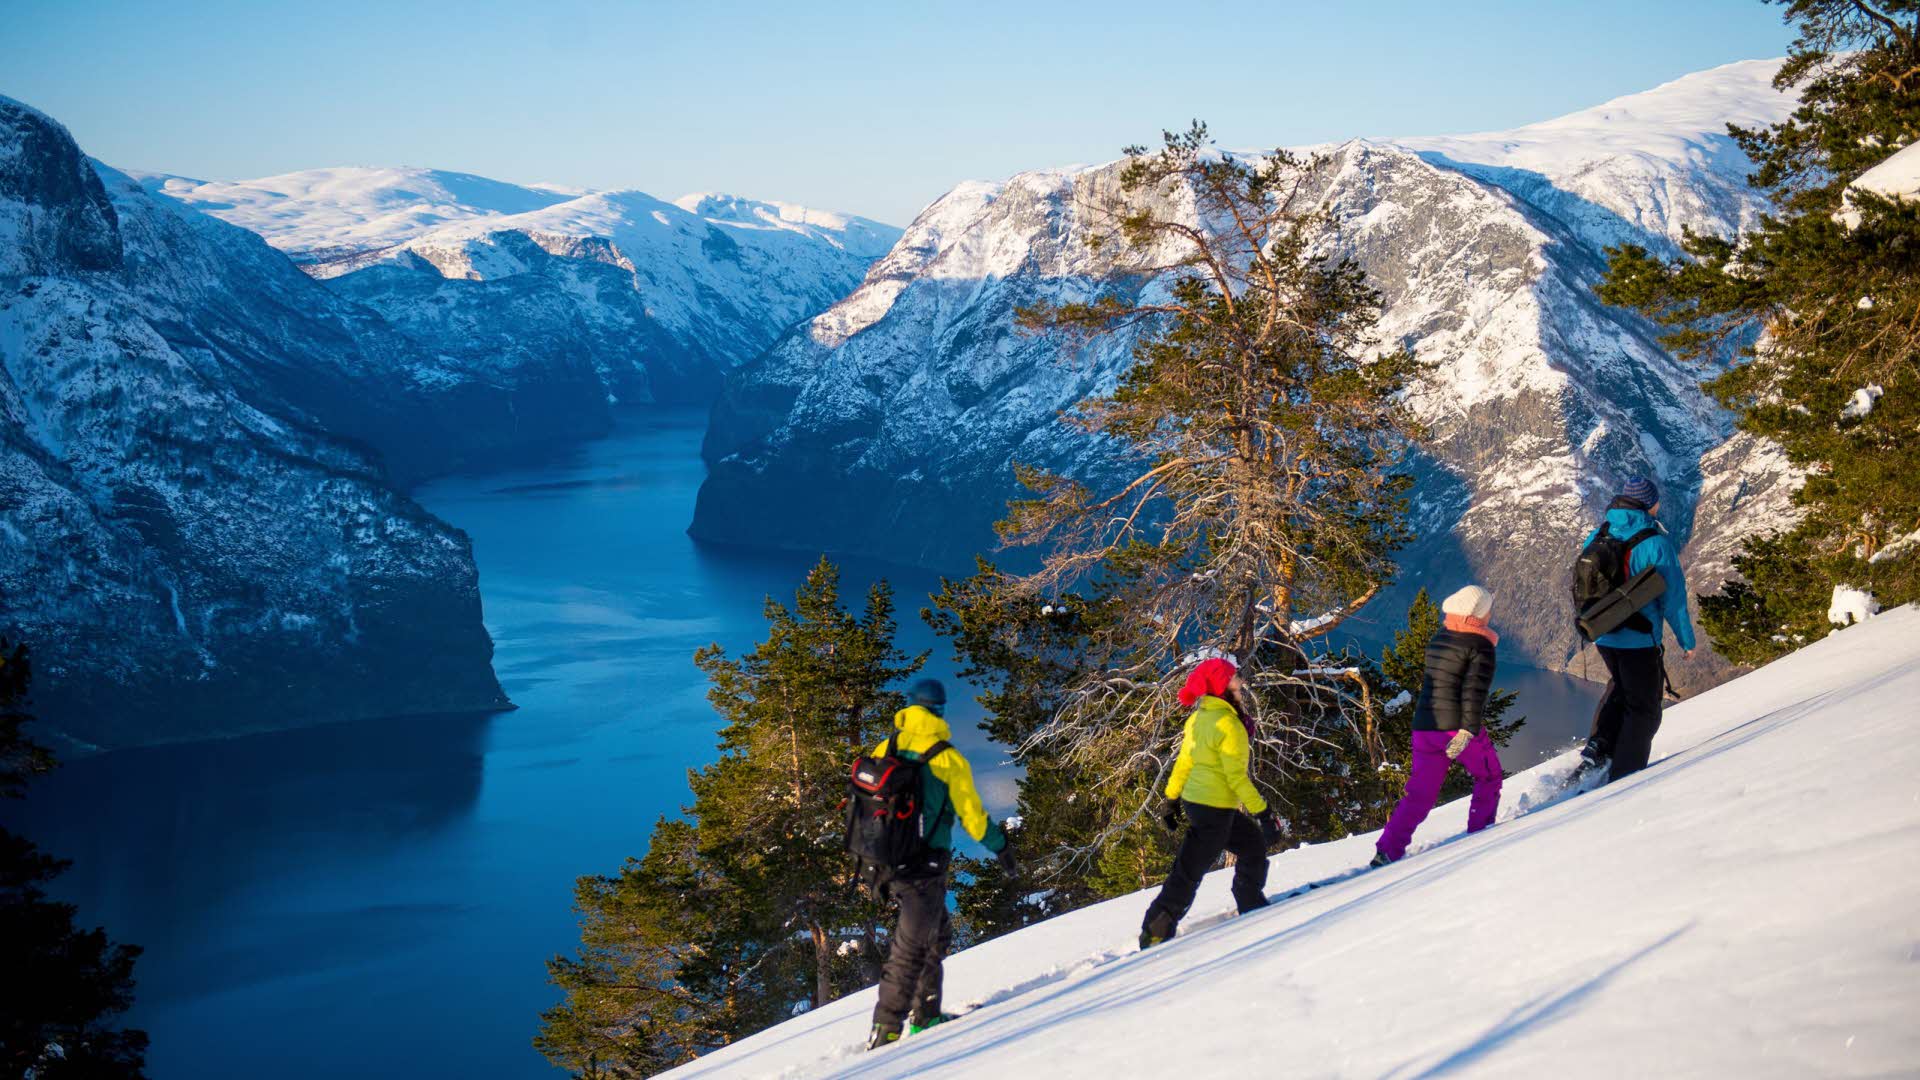 4 people in snow-shoe hiking gear walks across ridge by Aurlandsfjord approx. 900 masl on a sunny winter's day